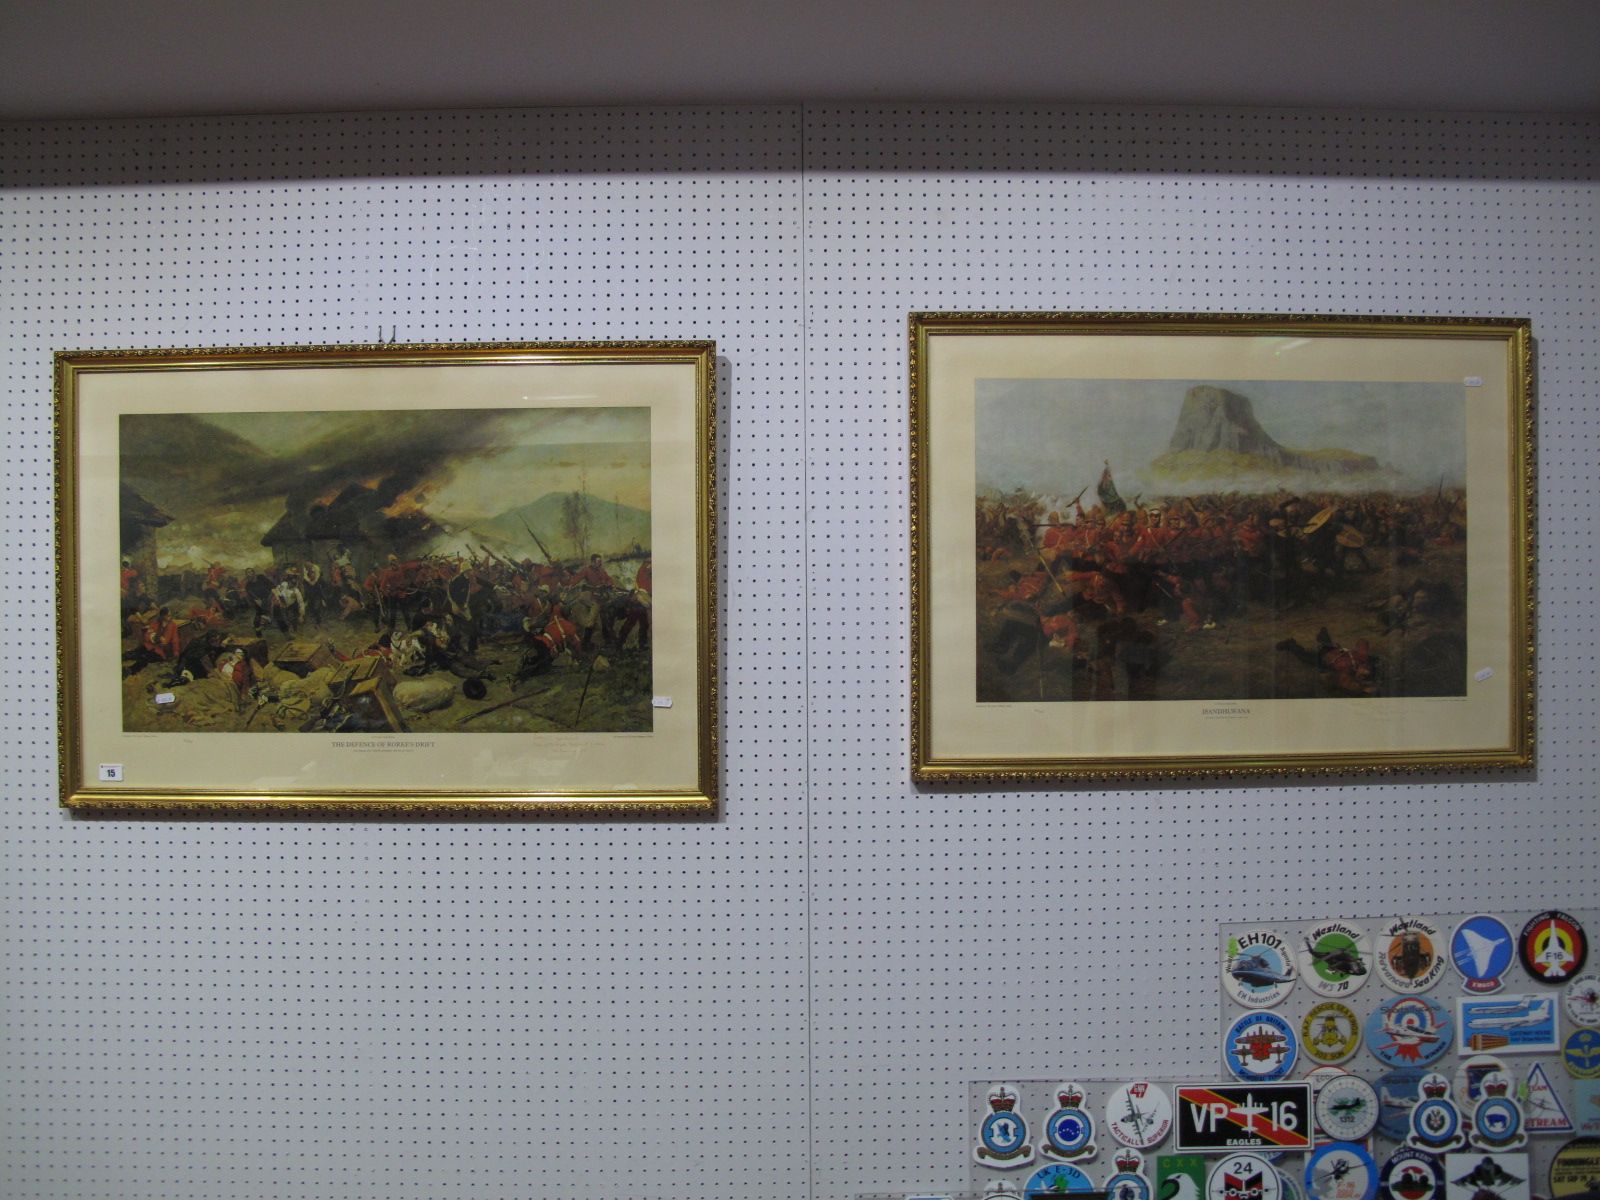 After Alphonse De Neuville. "The Defence of Rorke's Drift" and "Isandlwana". Both limited